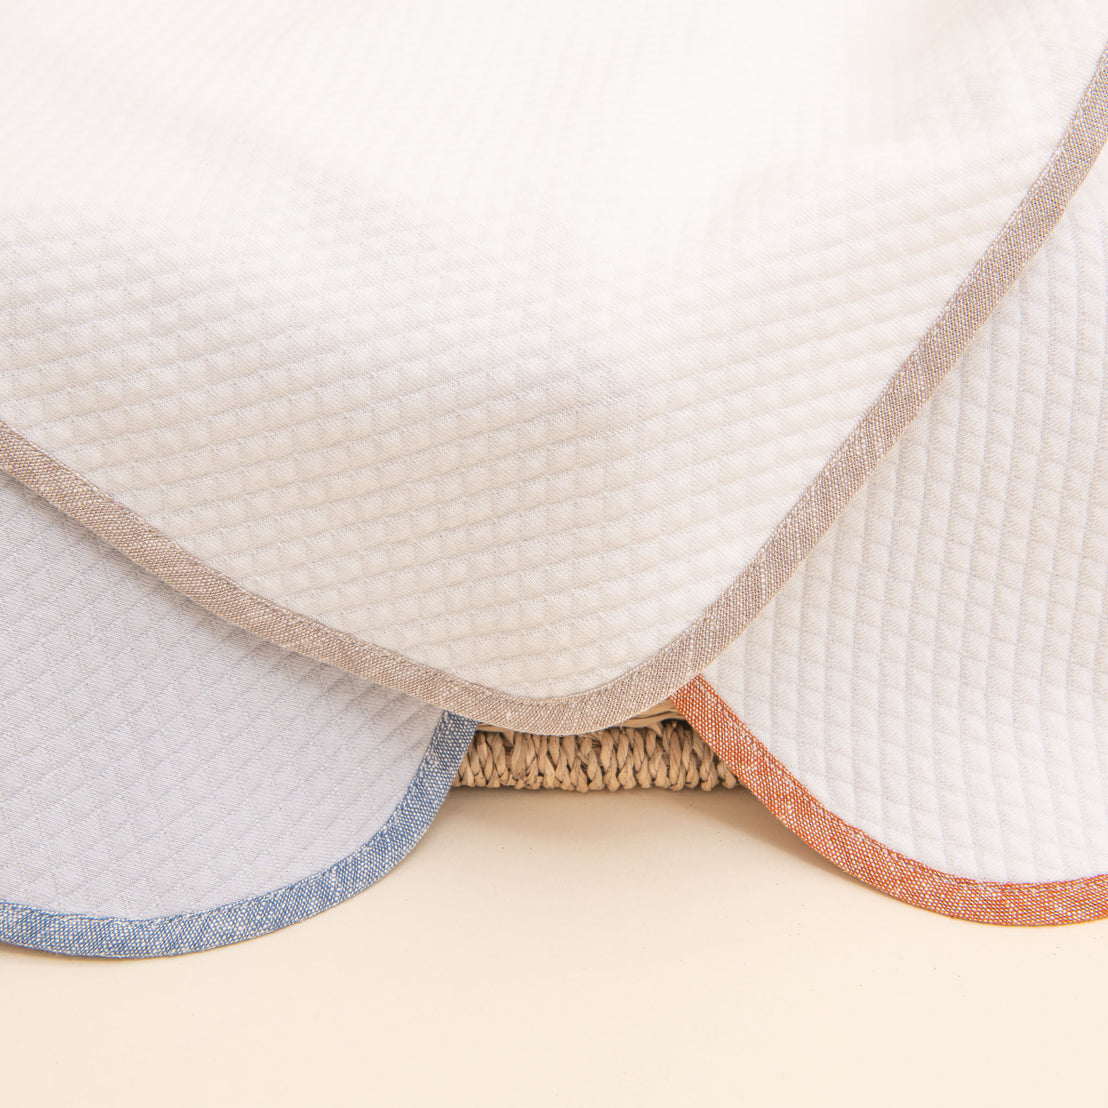 Close up photo of the three Silas Personalized Blanket corners, including the colors clay, sand, and indigo